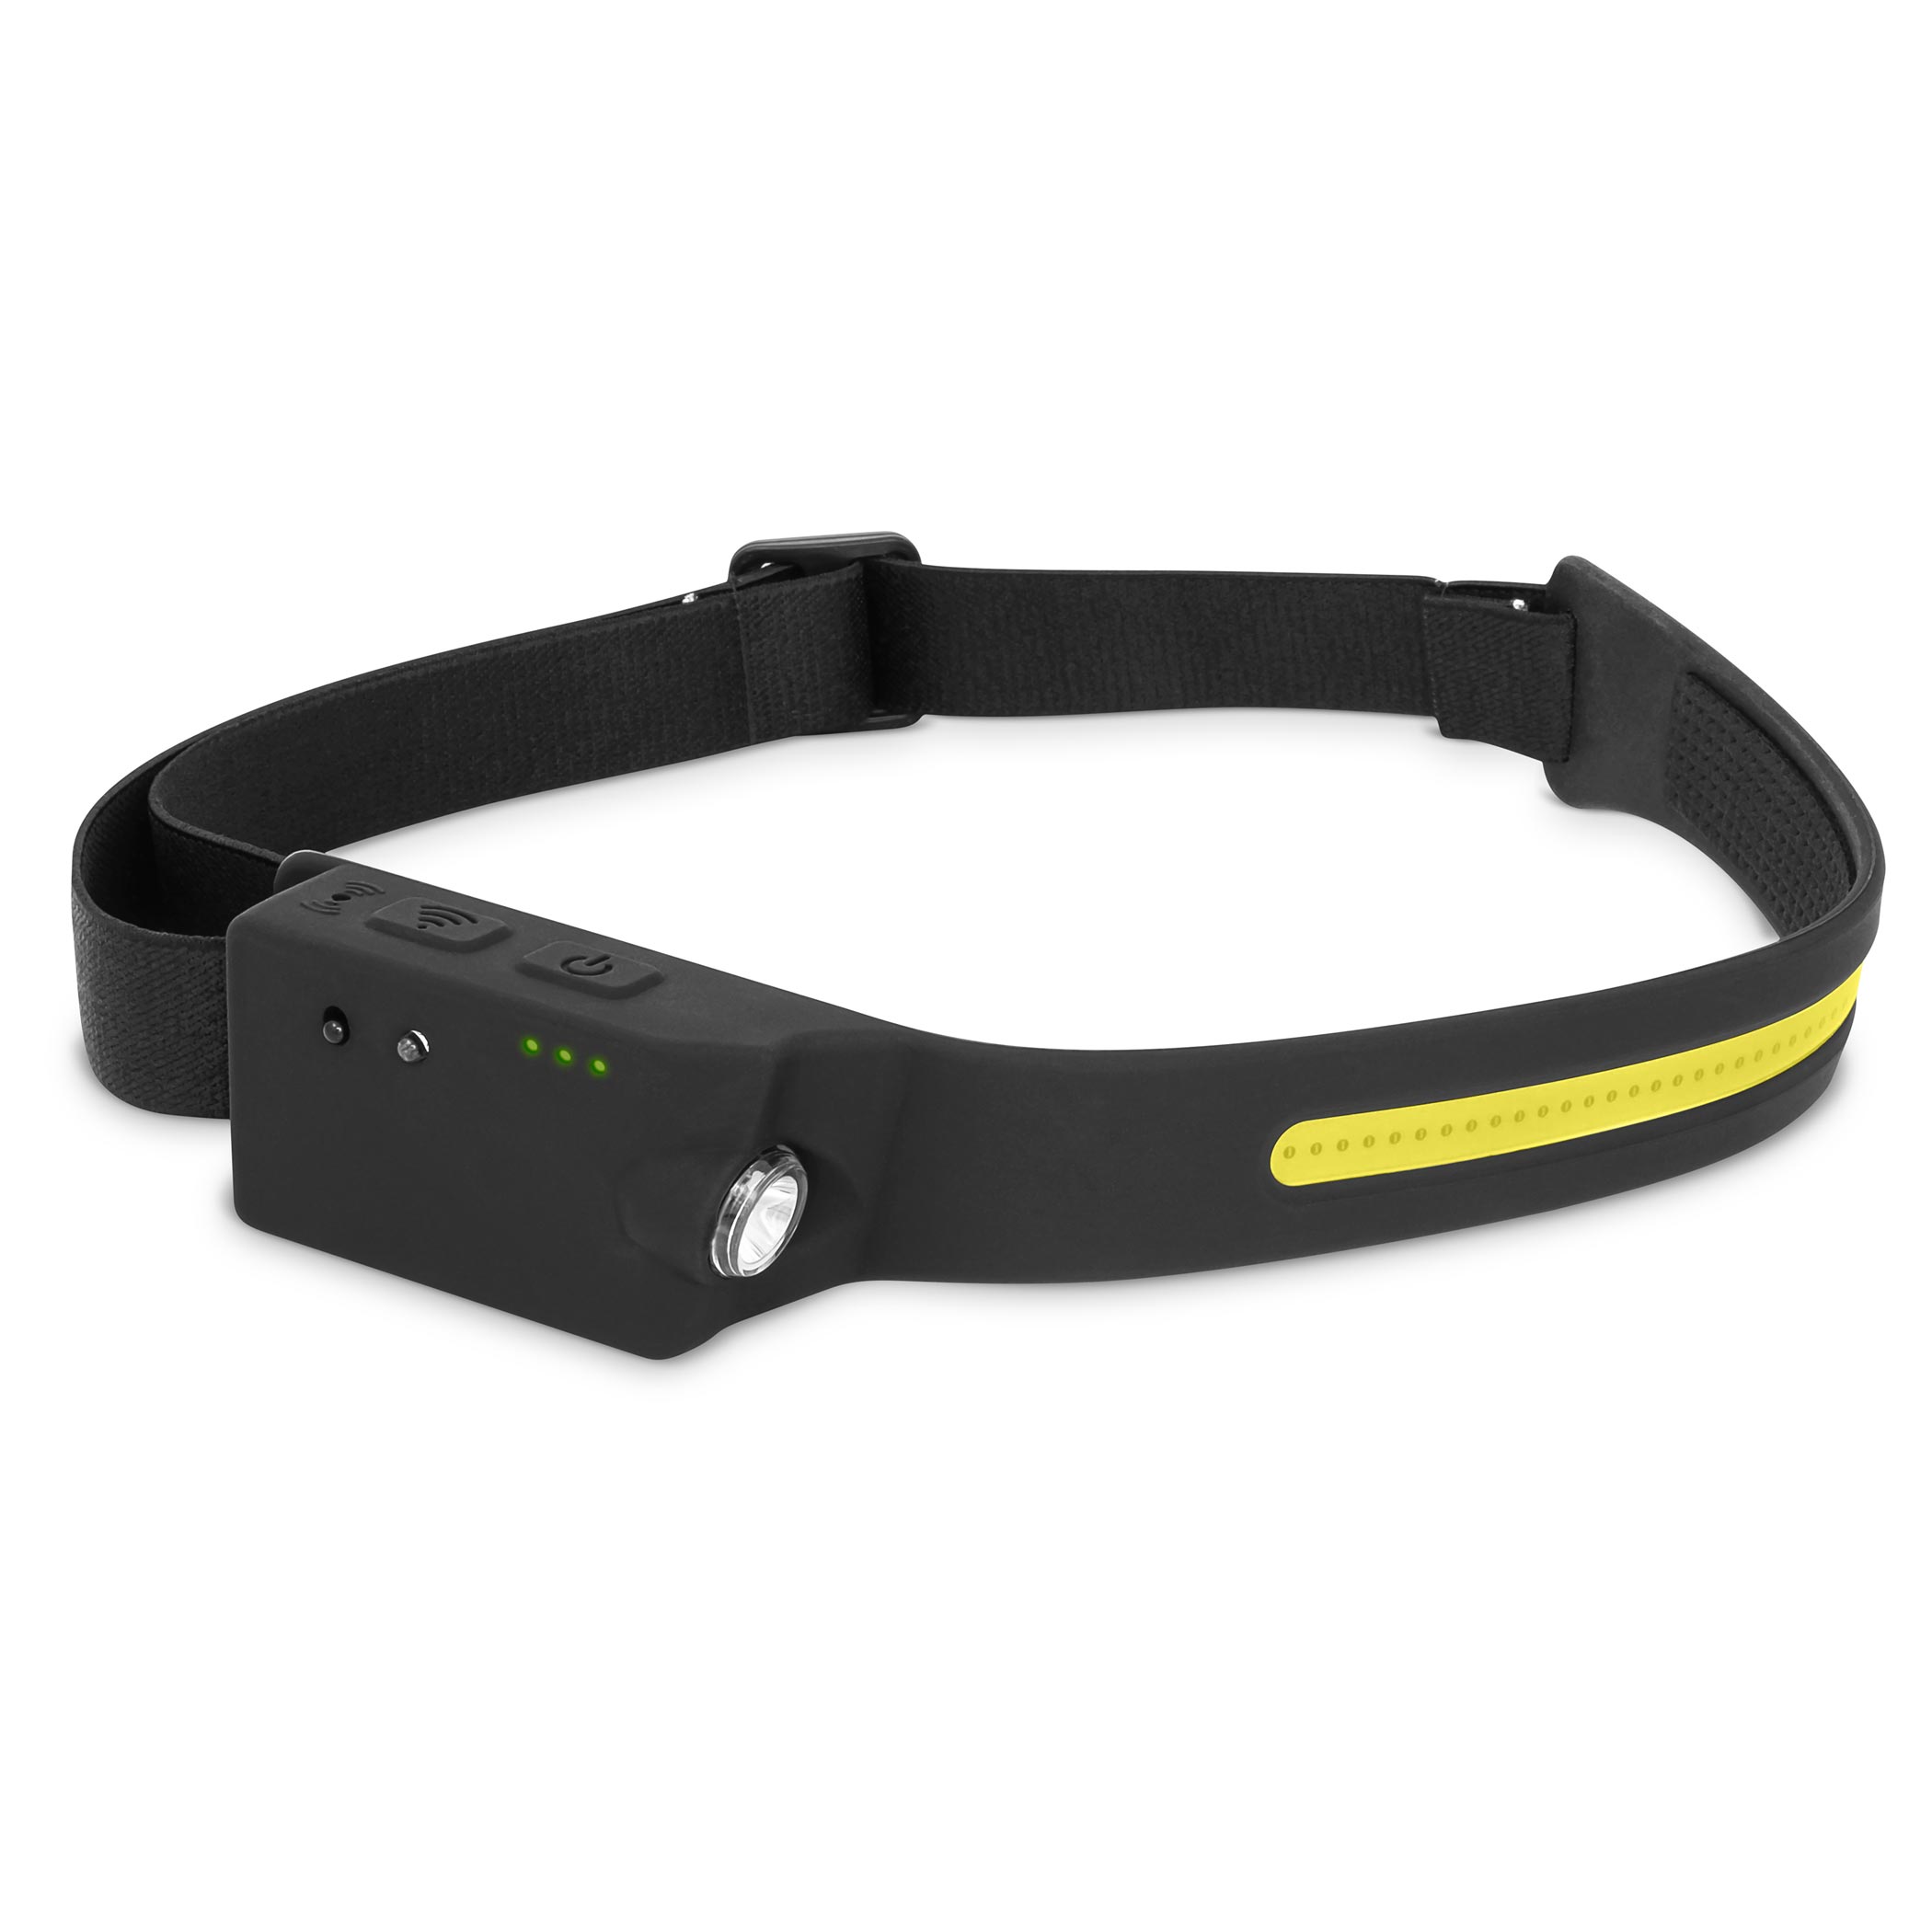 Rechargeable sports head torch | SLL 700 | Sencor